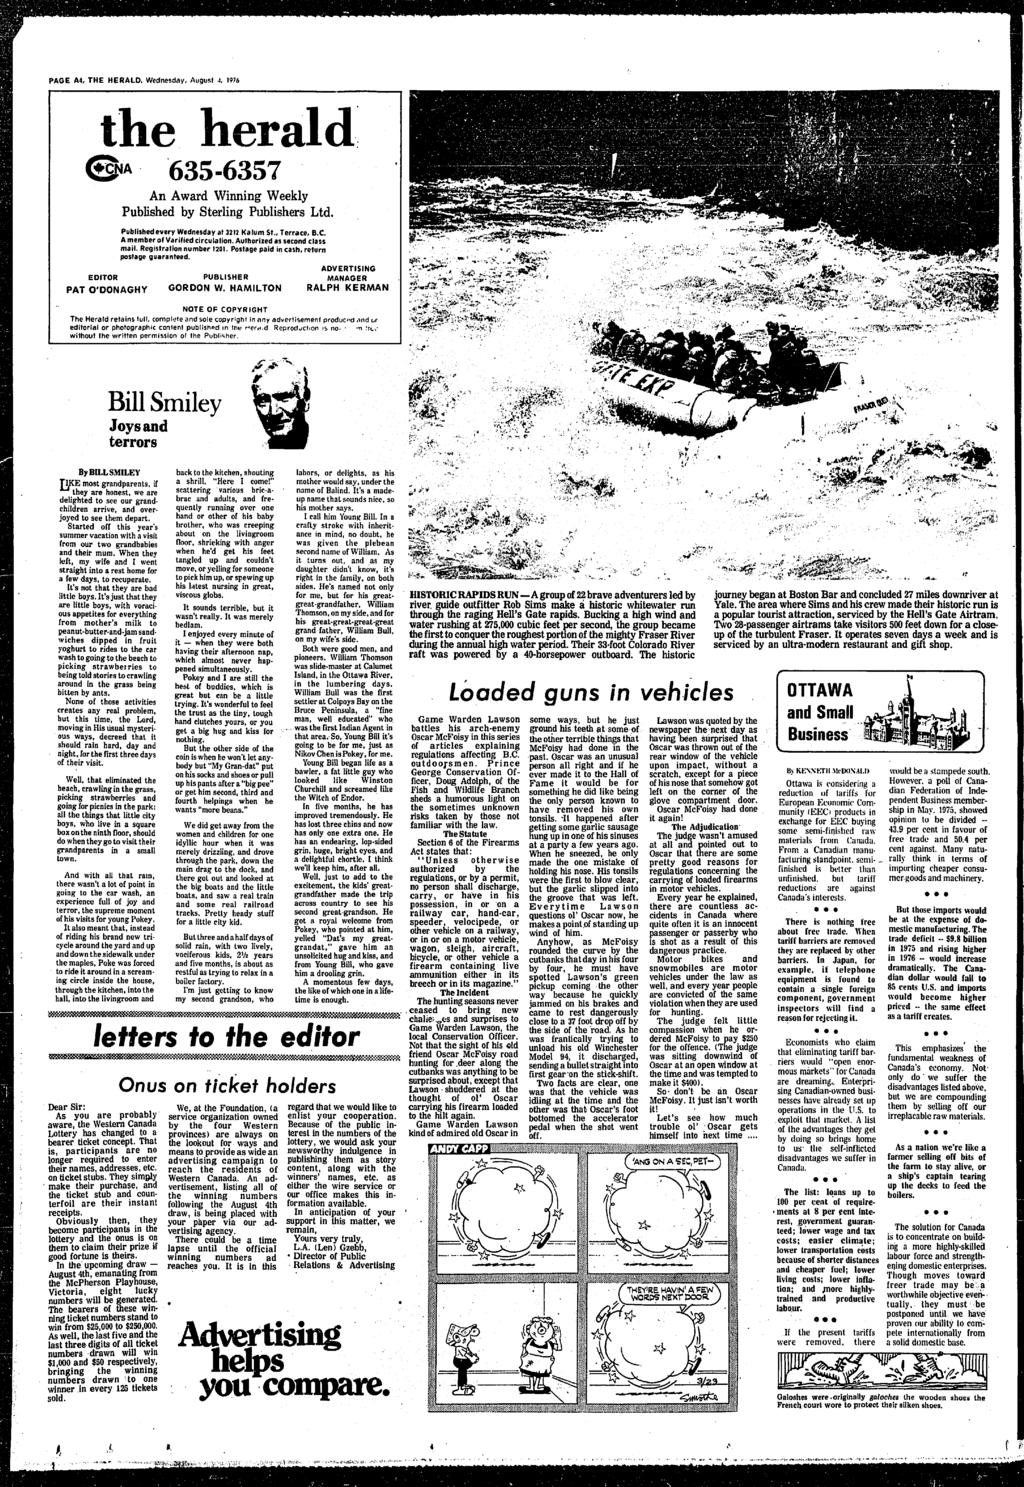 1 PAGE A4, THE HERALD, Wednesday, August 4, 1976 the herald 635-6357 An Award Wnnng Weekly Publshed by Sterlng NJblshers Ltd. Publshedevery Wednesday at 32t2 Kalum St., Terrace, B.C.